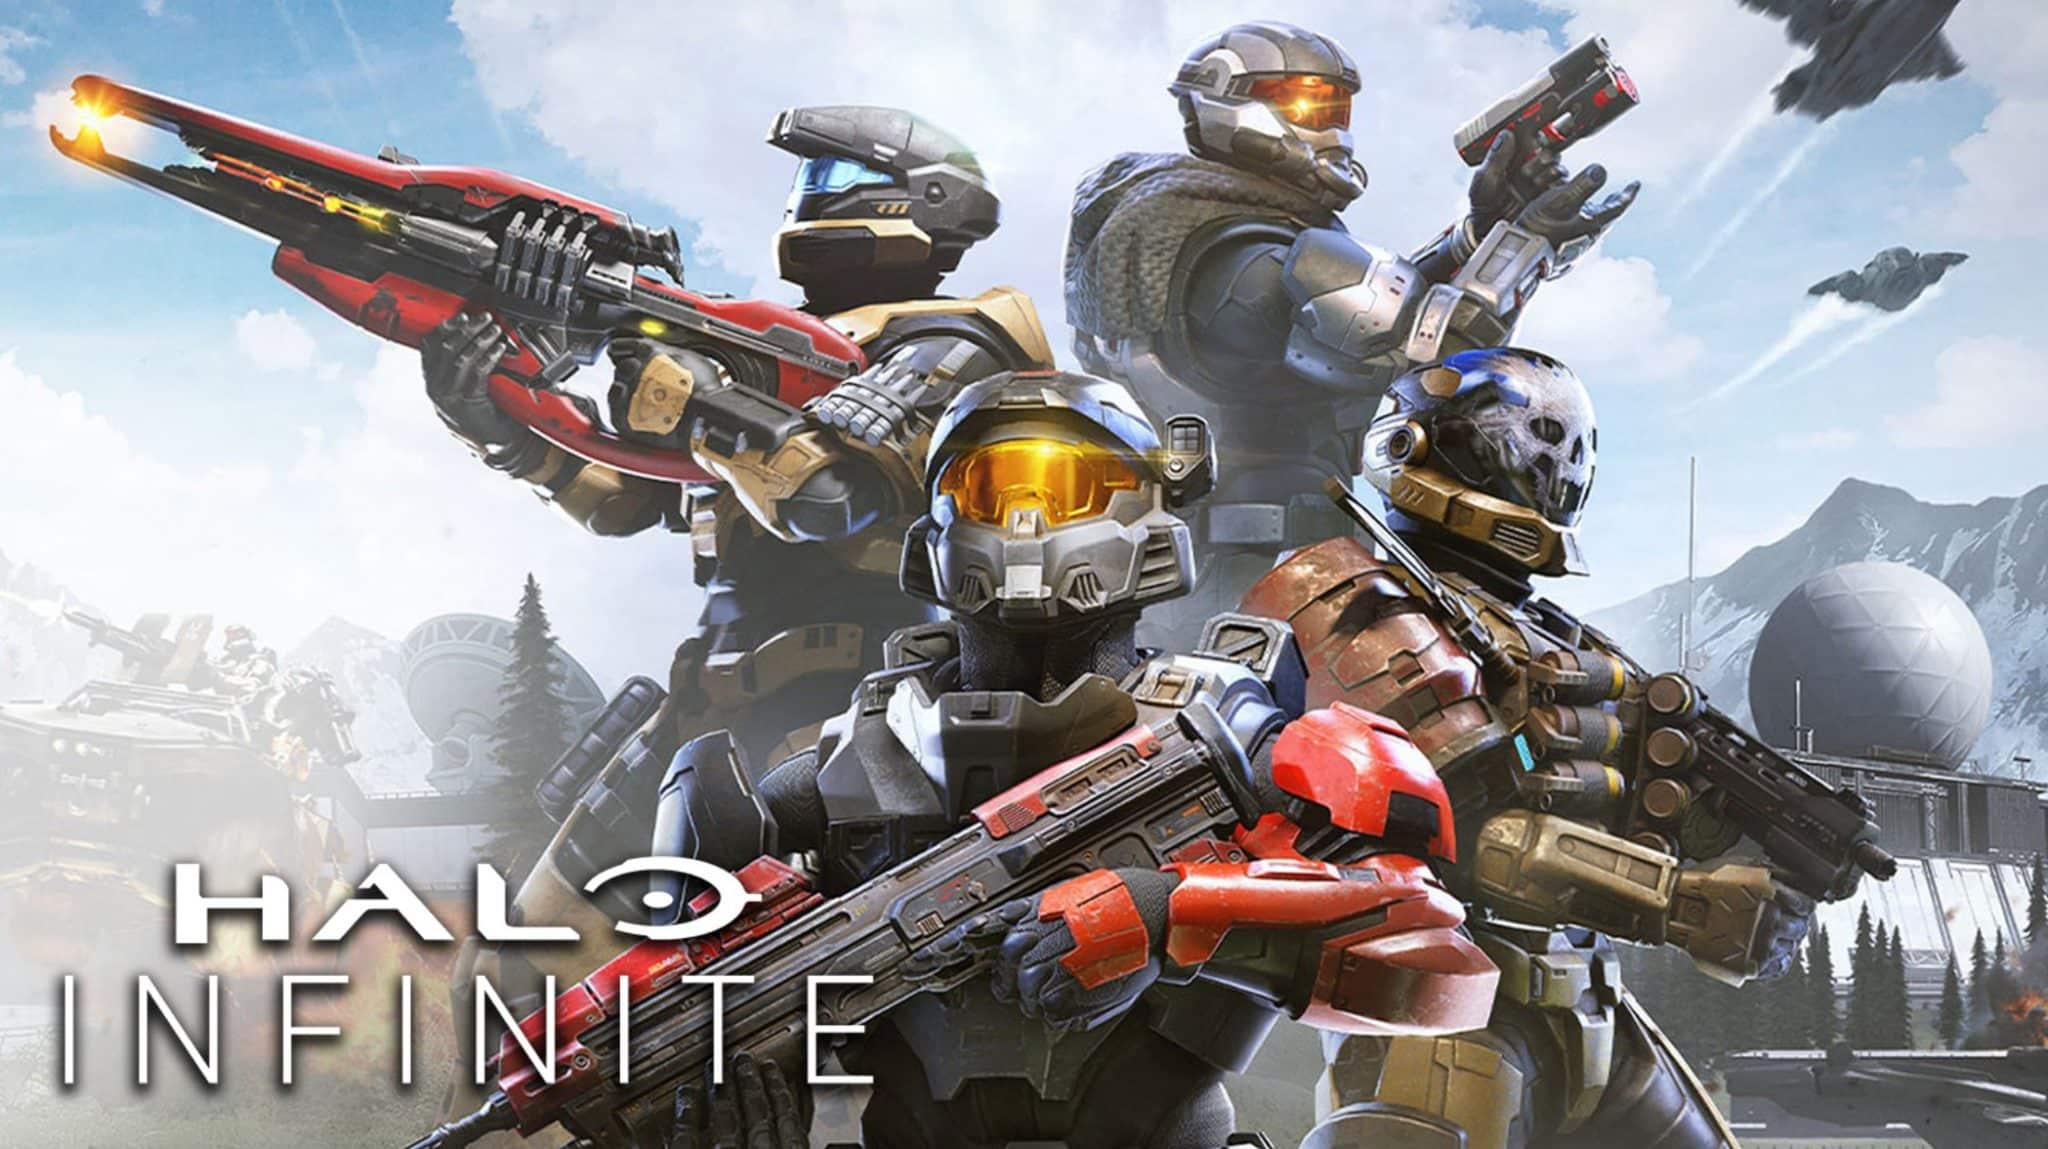 Halo Infinite July Preview event